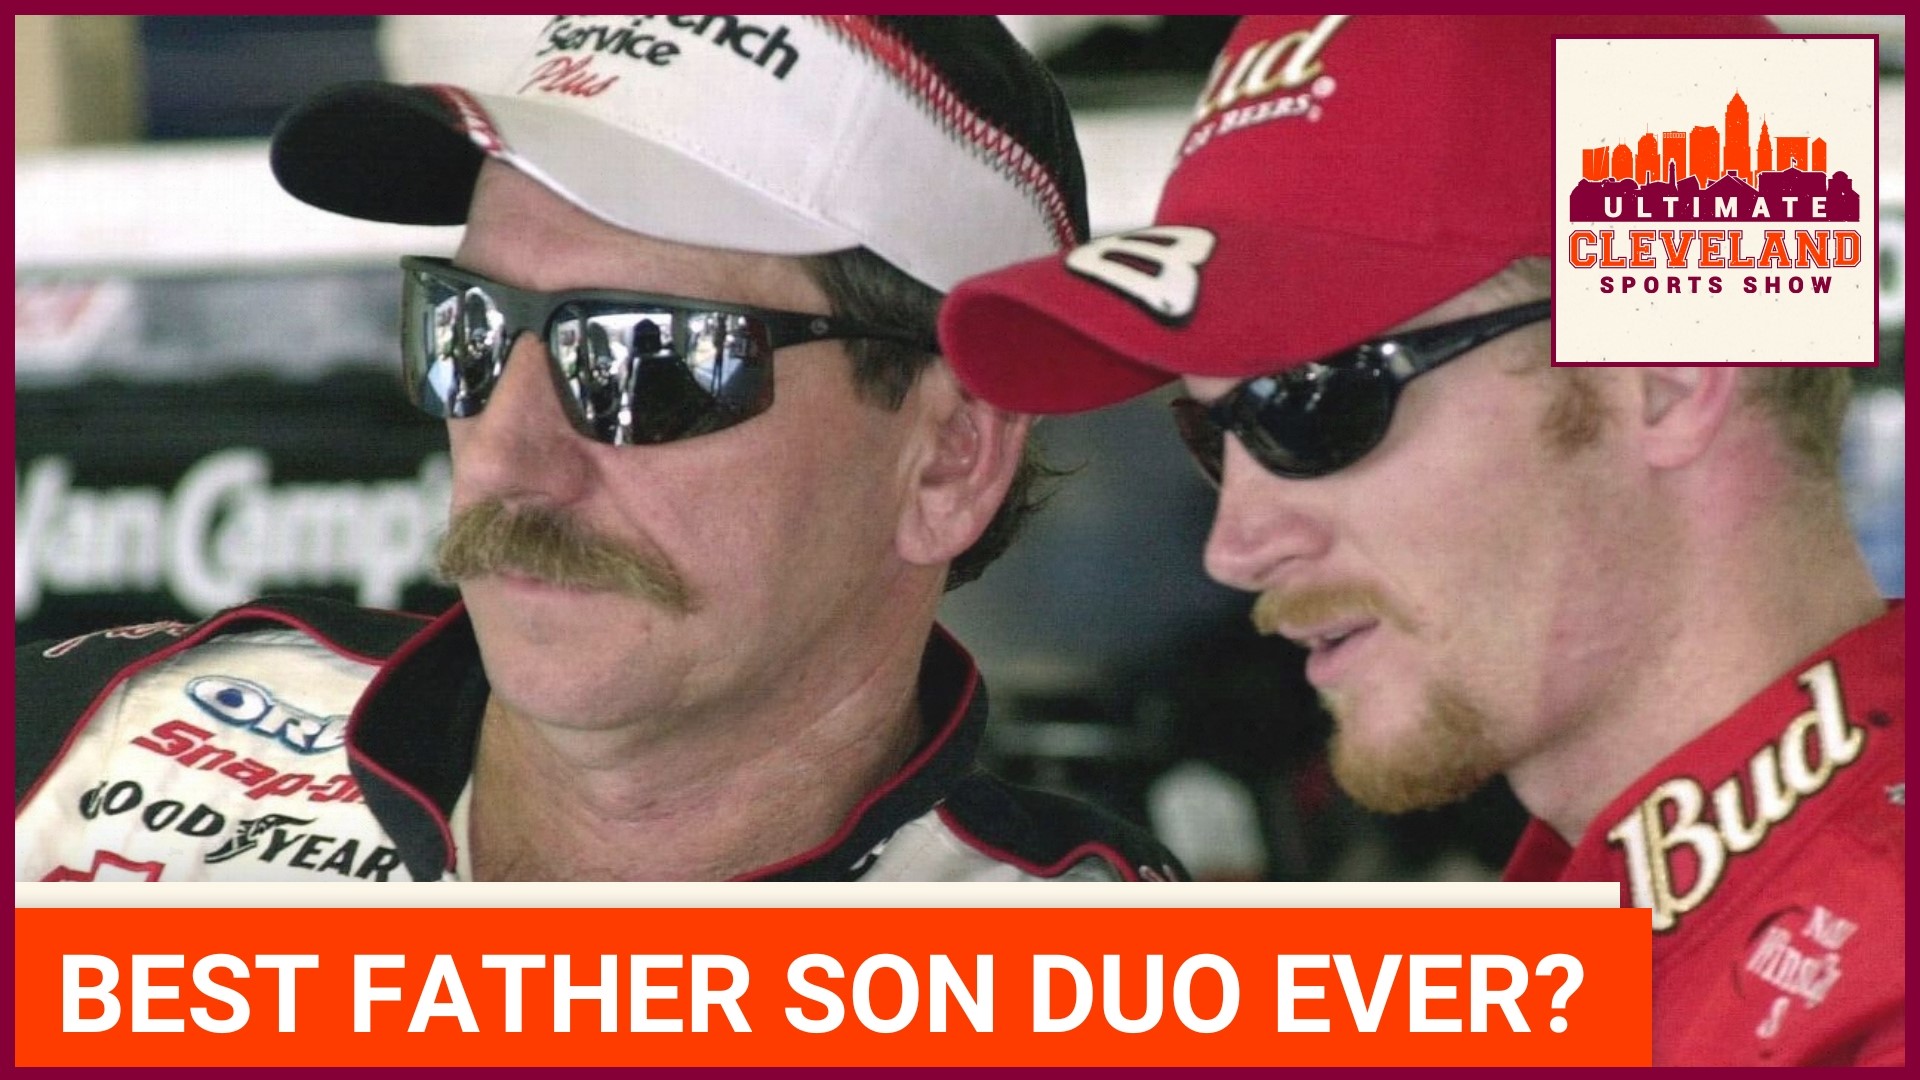 Where does the Earnhardts rank all-time in father son duos?